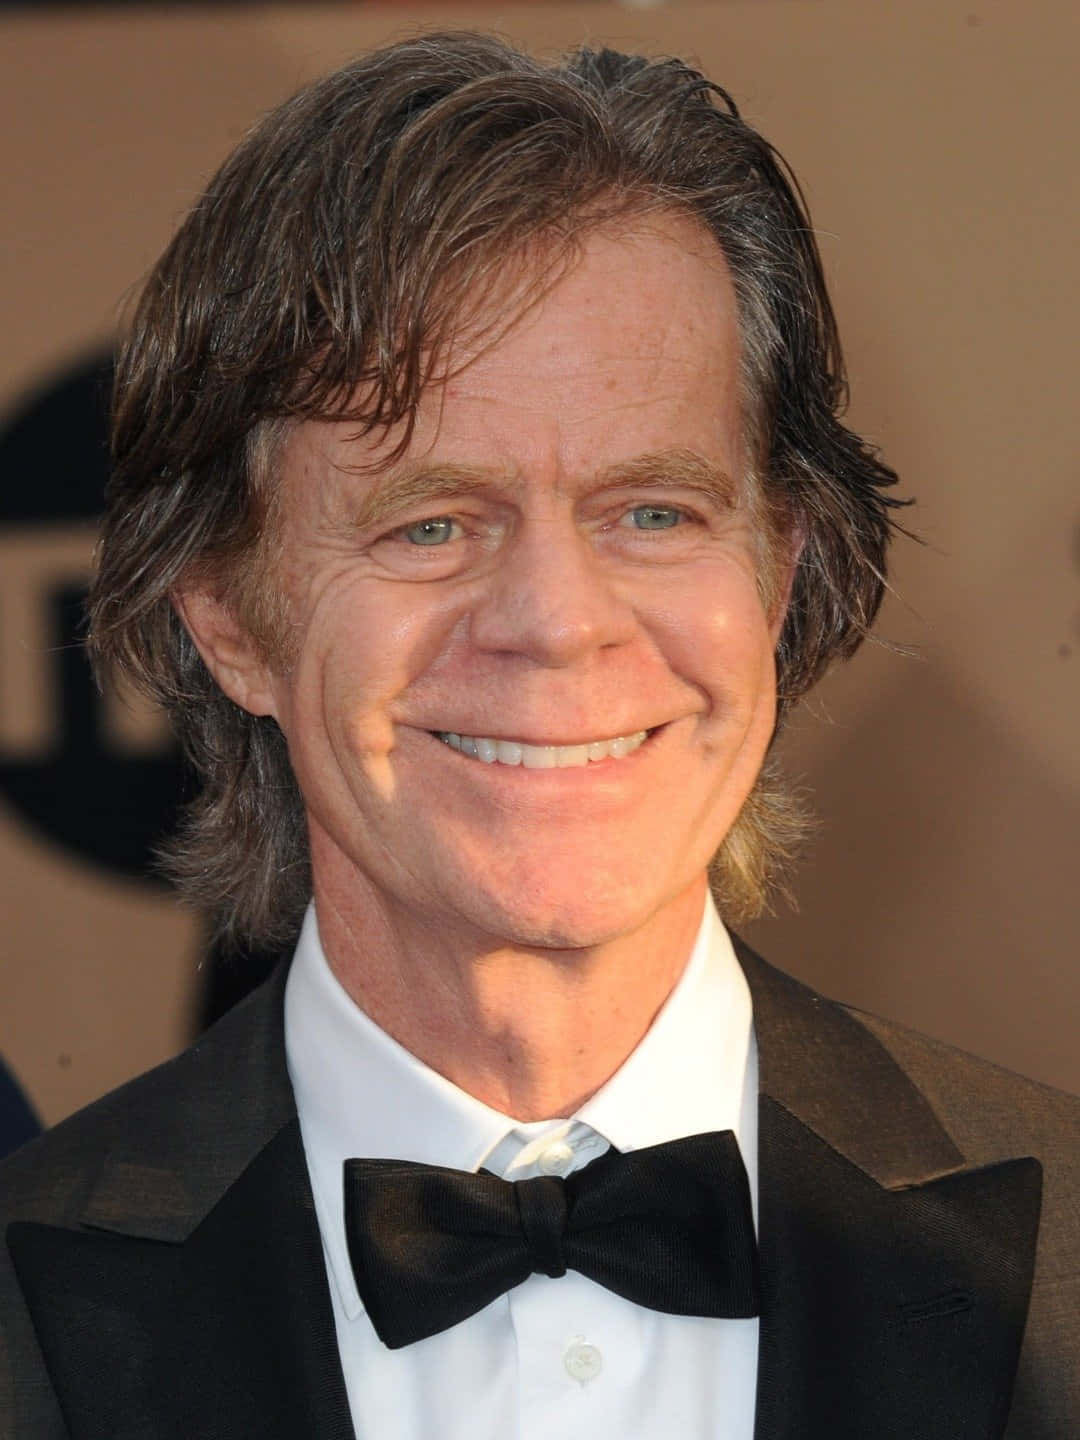 William H. Macy posing in a stylish suit Wallpaper